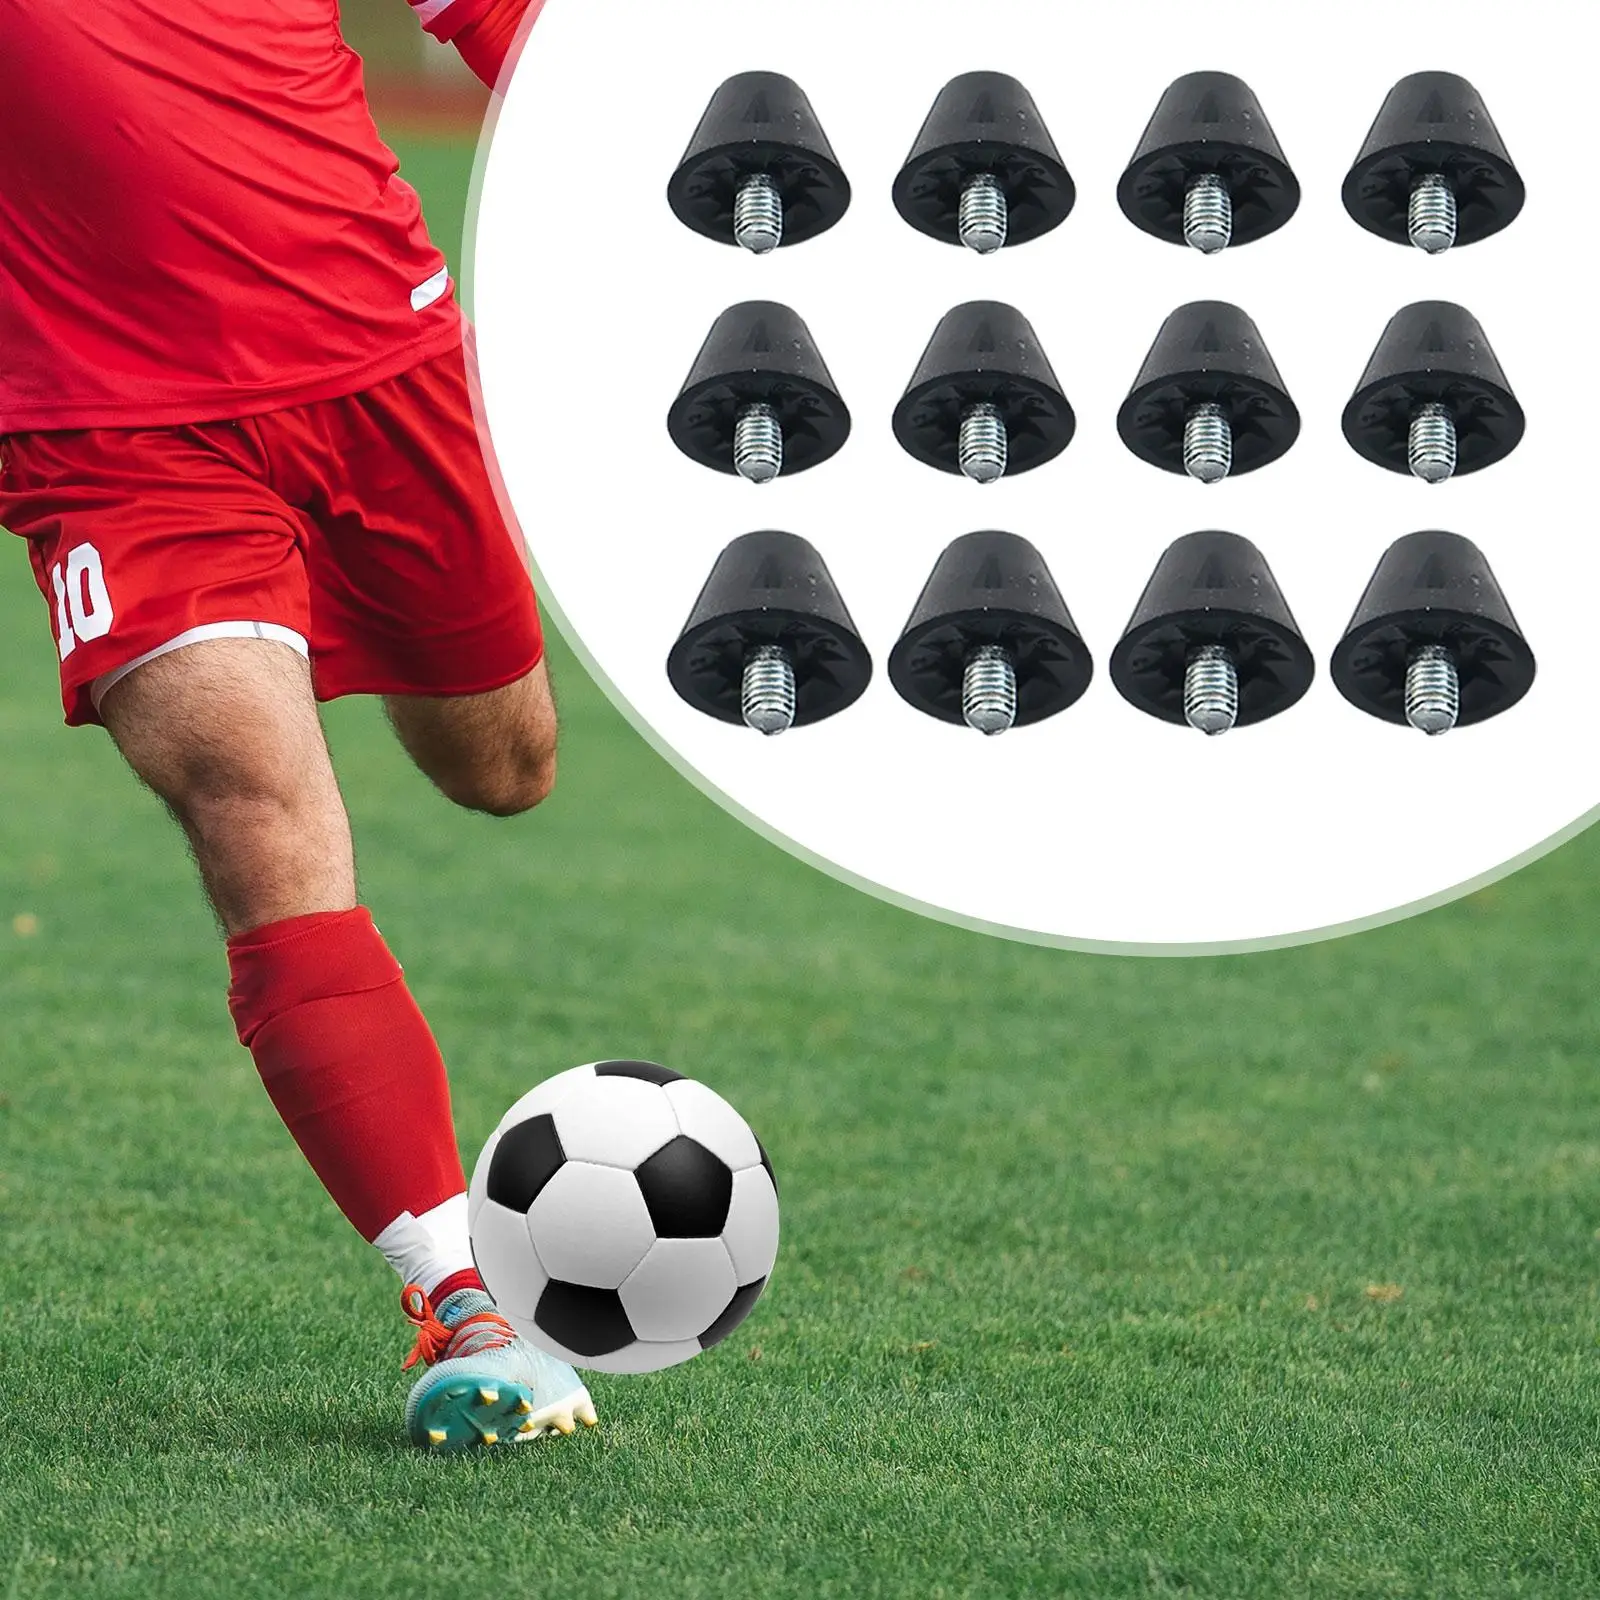 12x Football Shoe Spikes M5 Anti Slip Portable Turf Rugby Studs for Athletic Sneakers Training Indoor Outdoor Sports Competition